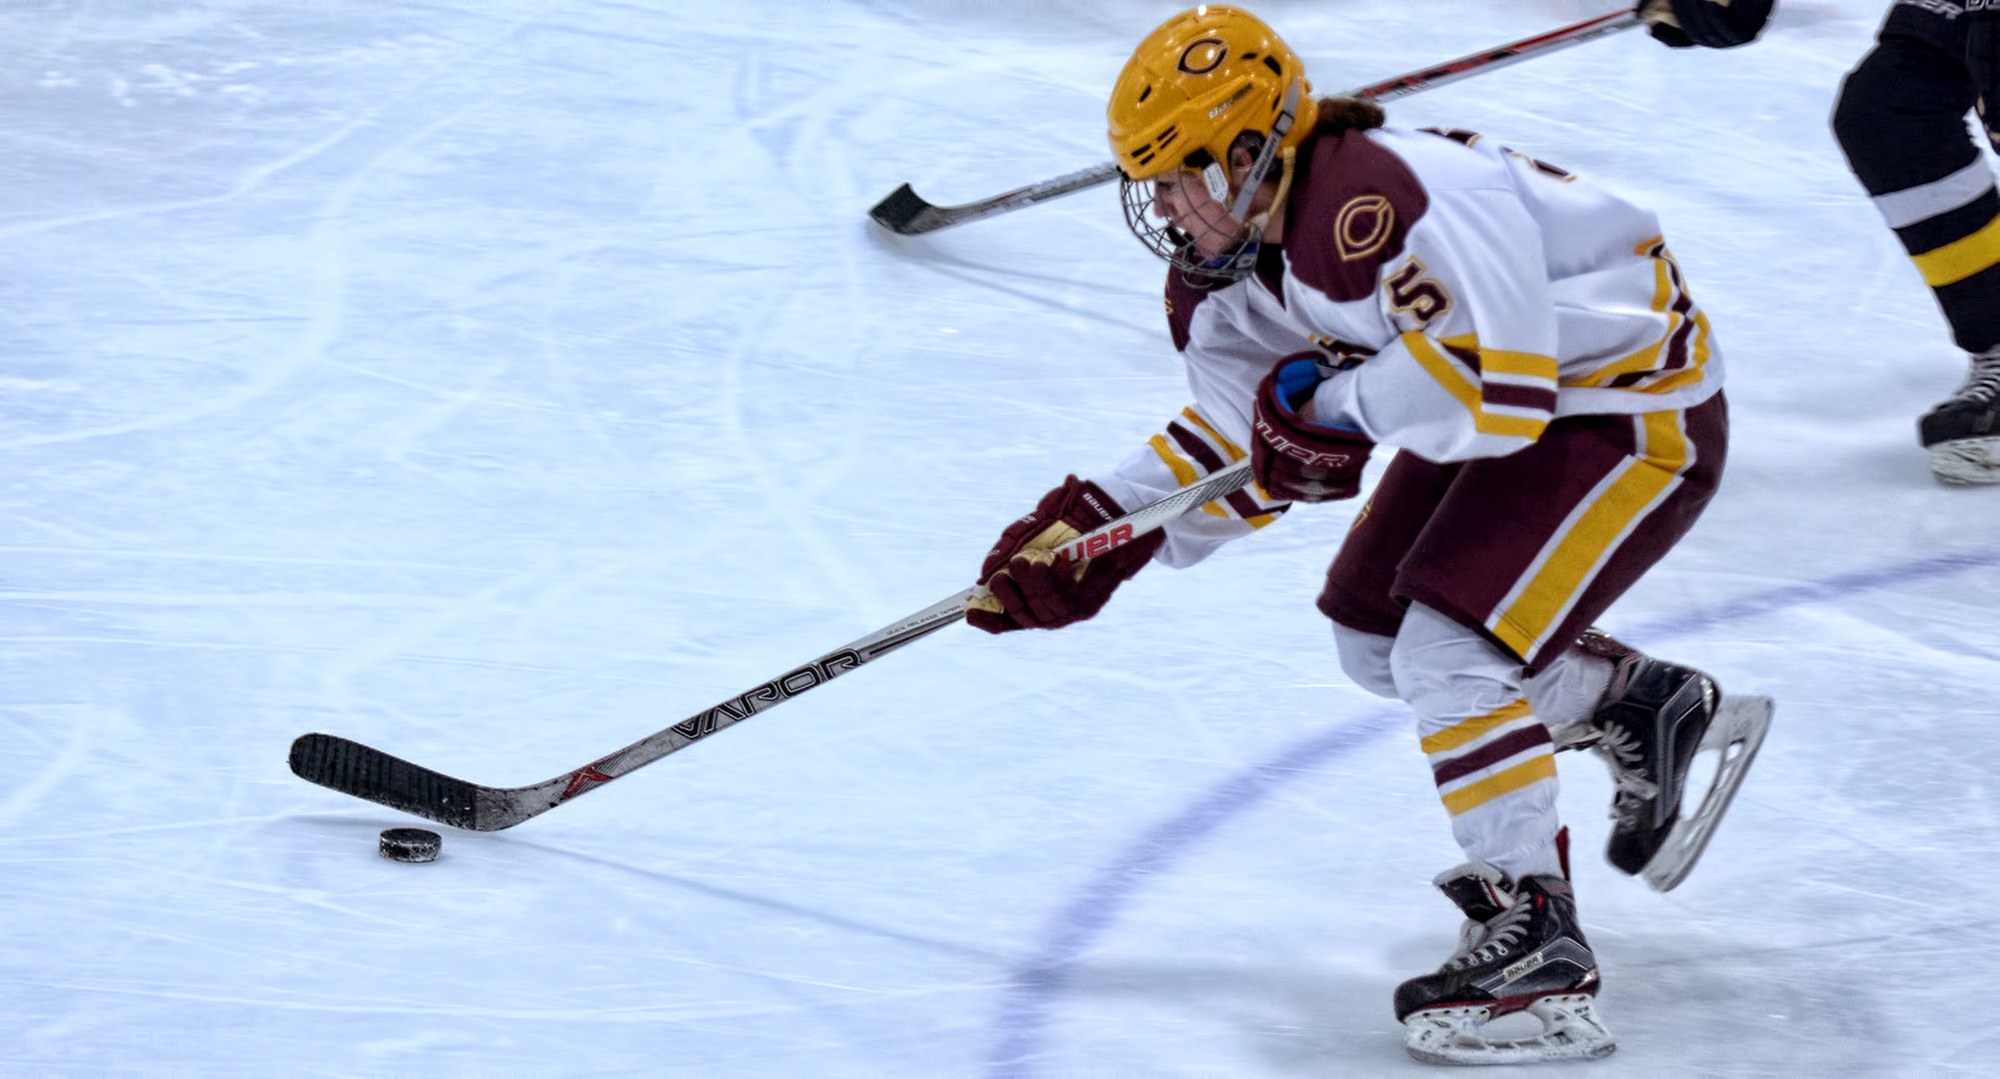 Freshman Josee Lundgren scored her third goal of the season in the Cobbers' 2-2 OT tie at Augsburg in the series opener.